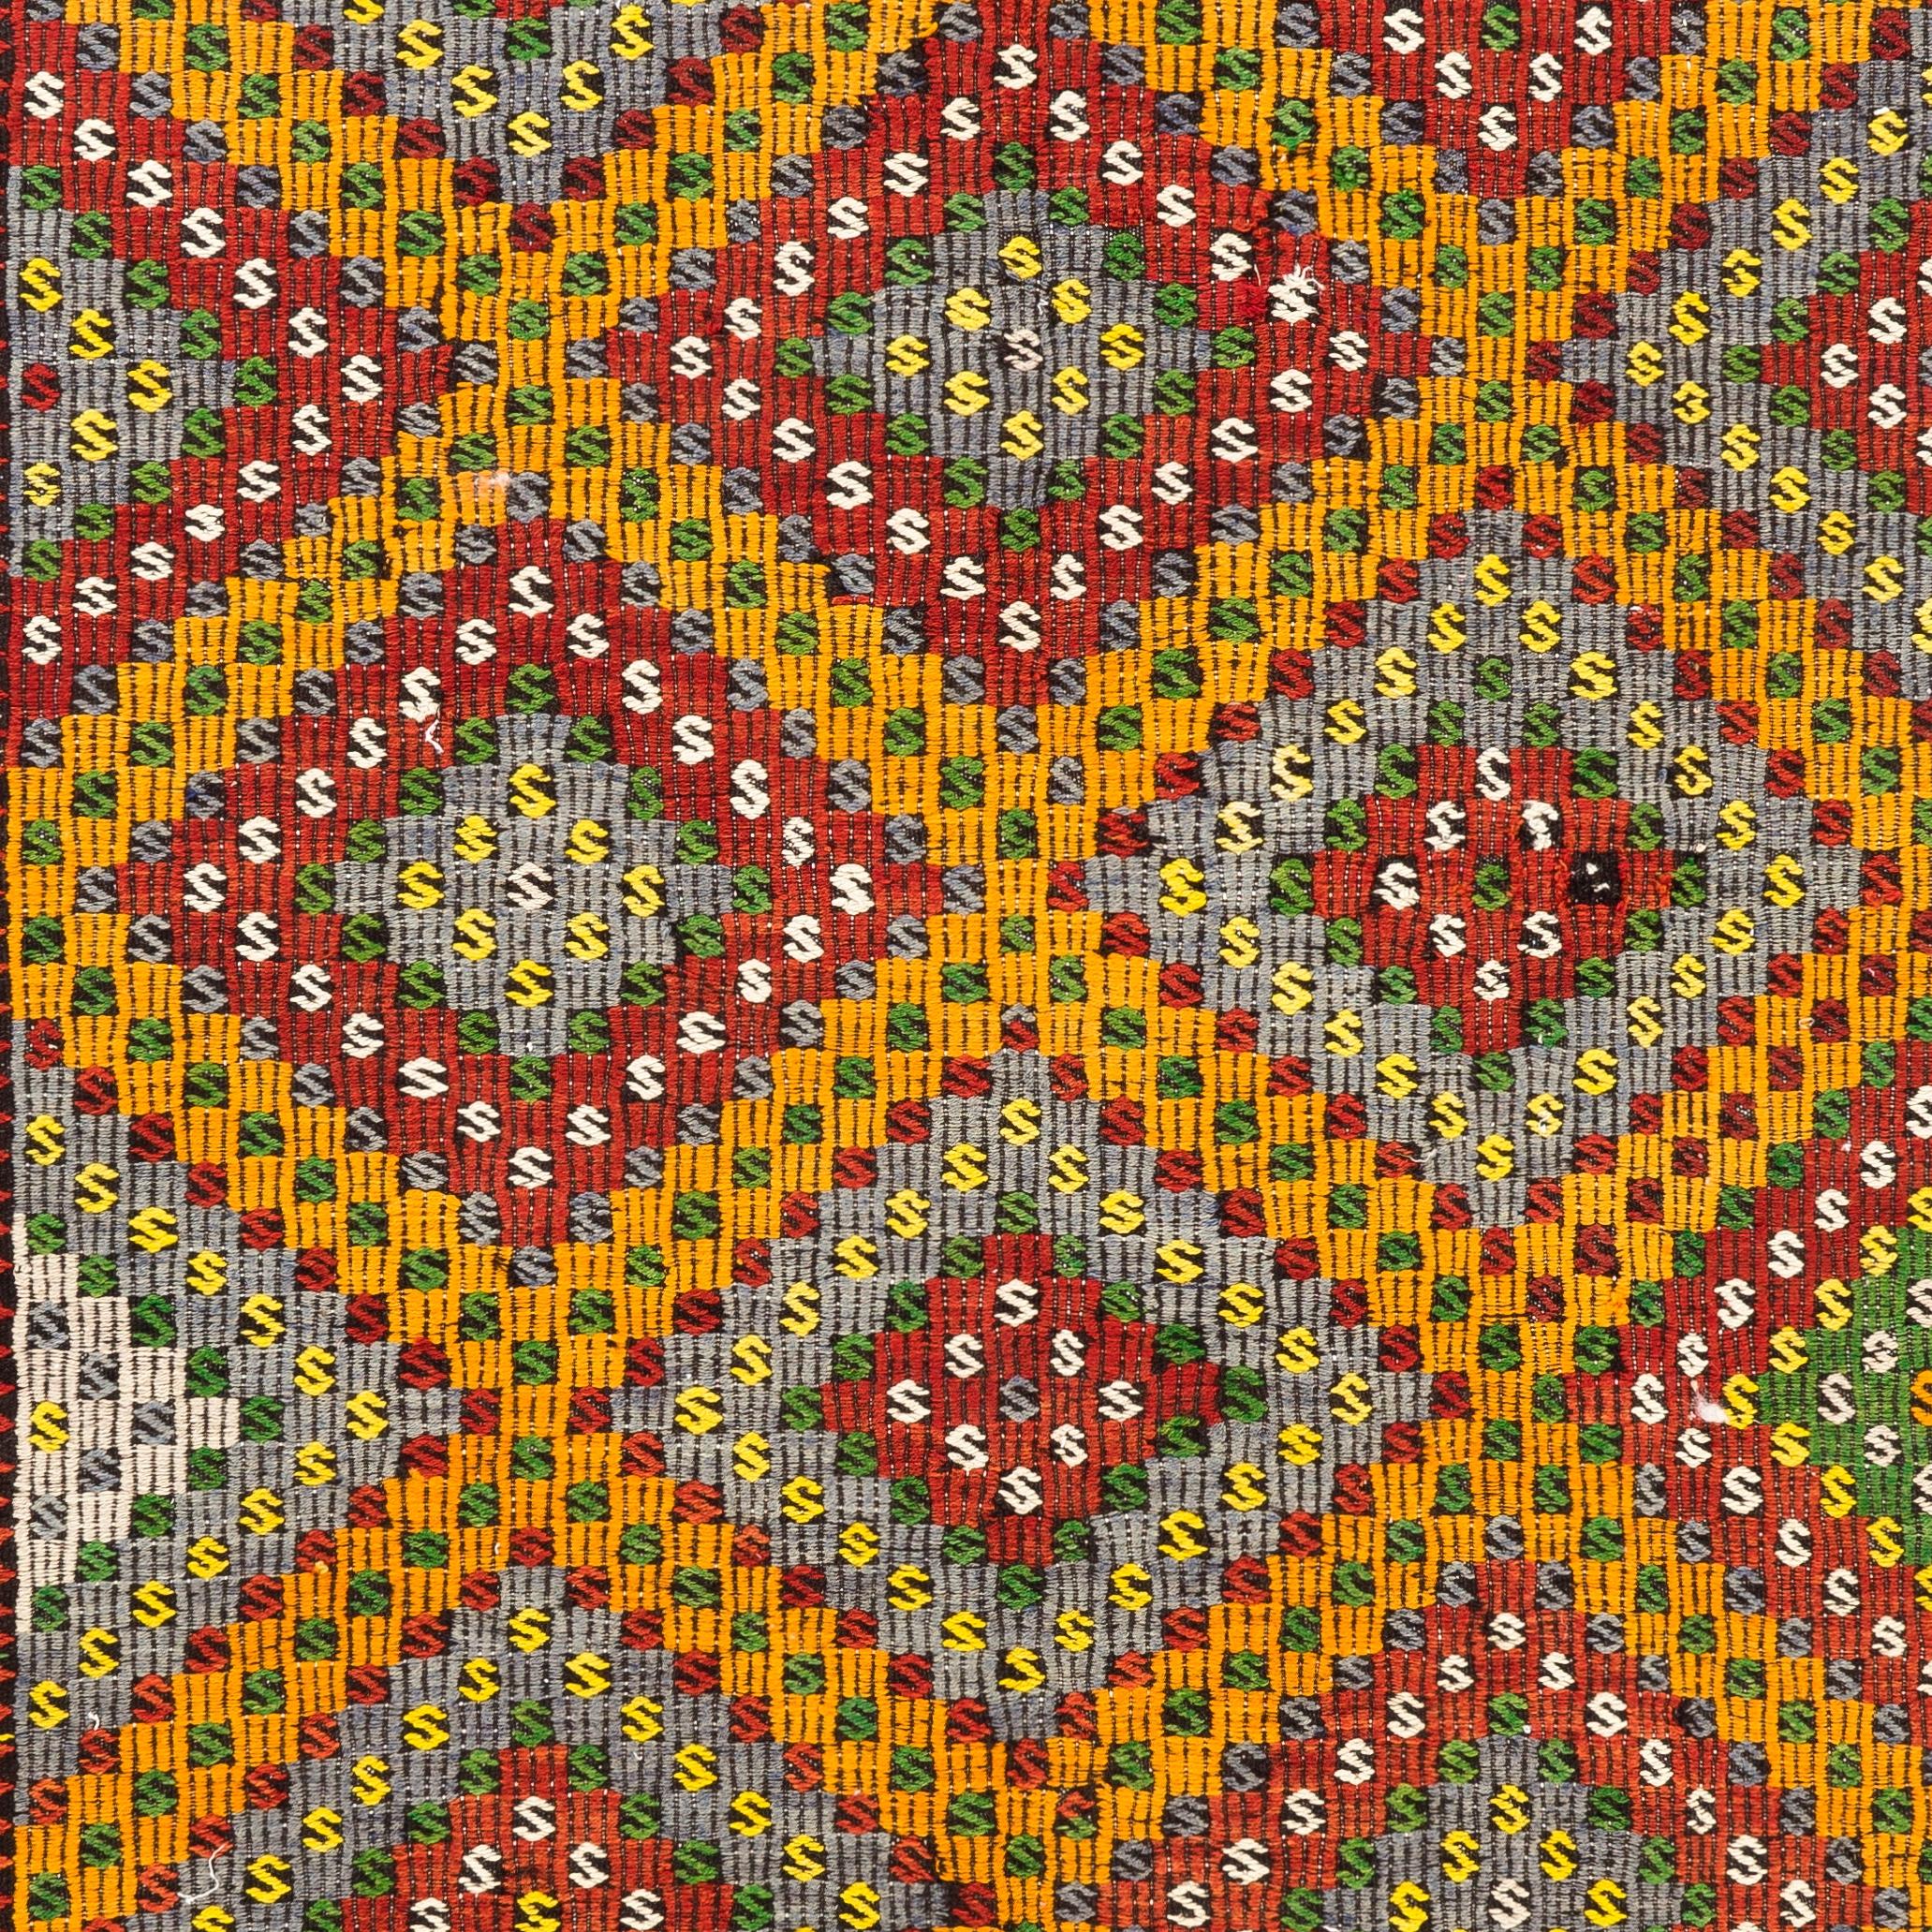 Hand-Woven 6x10.7 Ft Turkish Kilim in Red, Yellow, Green & Gray Colors. Dazzling Jijim Rug For Sale